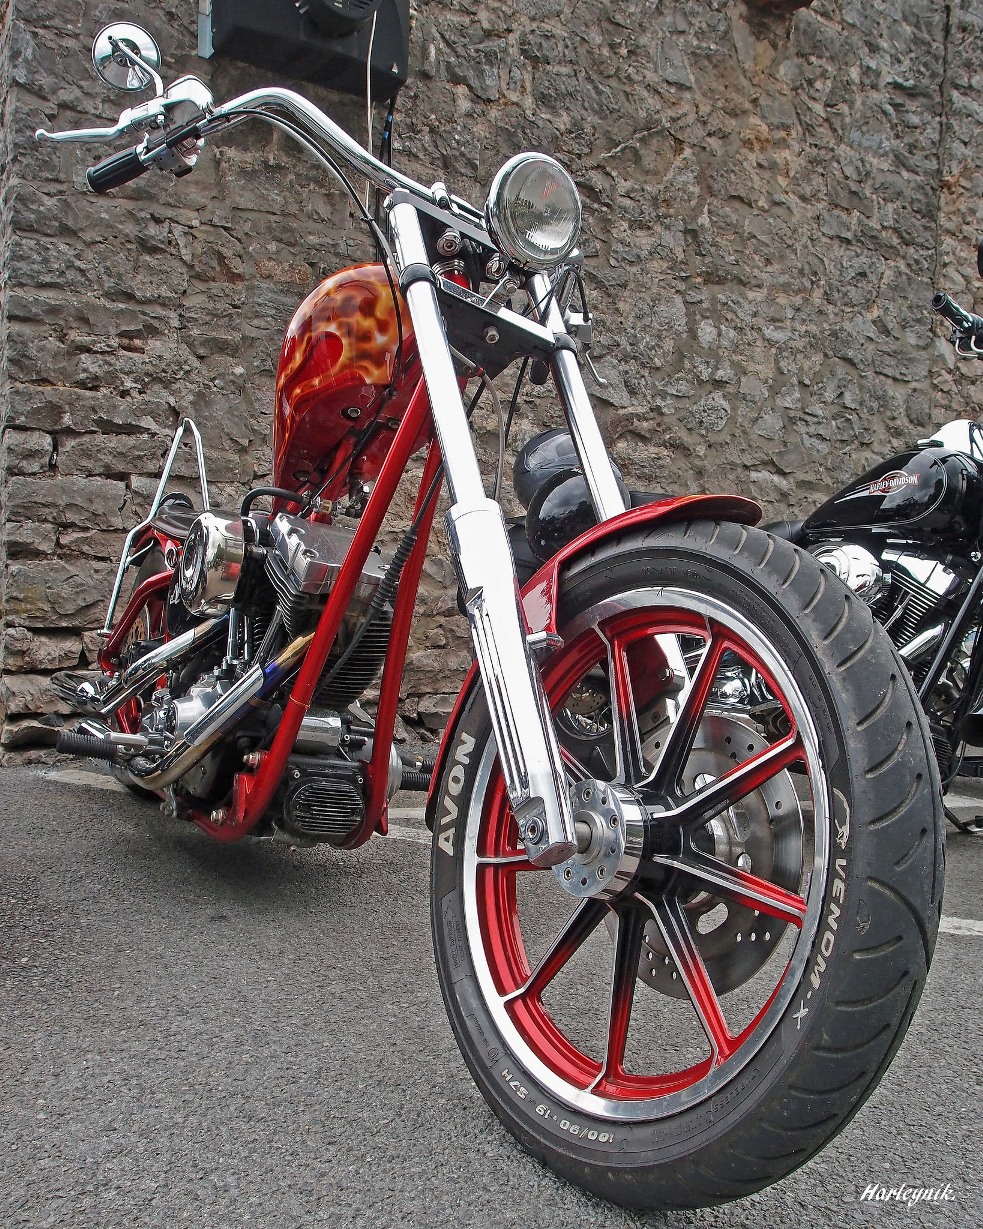 Harley Davidson Motorcycles -Style Your Ride - The WoW Style